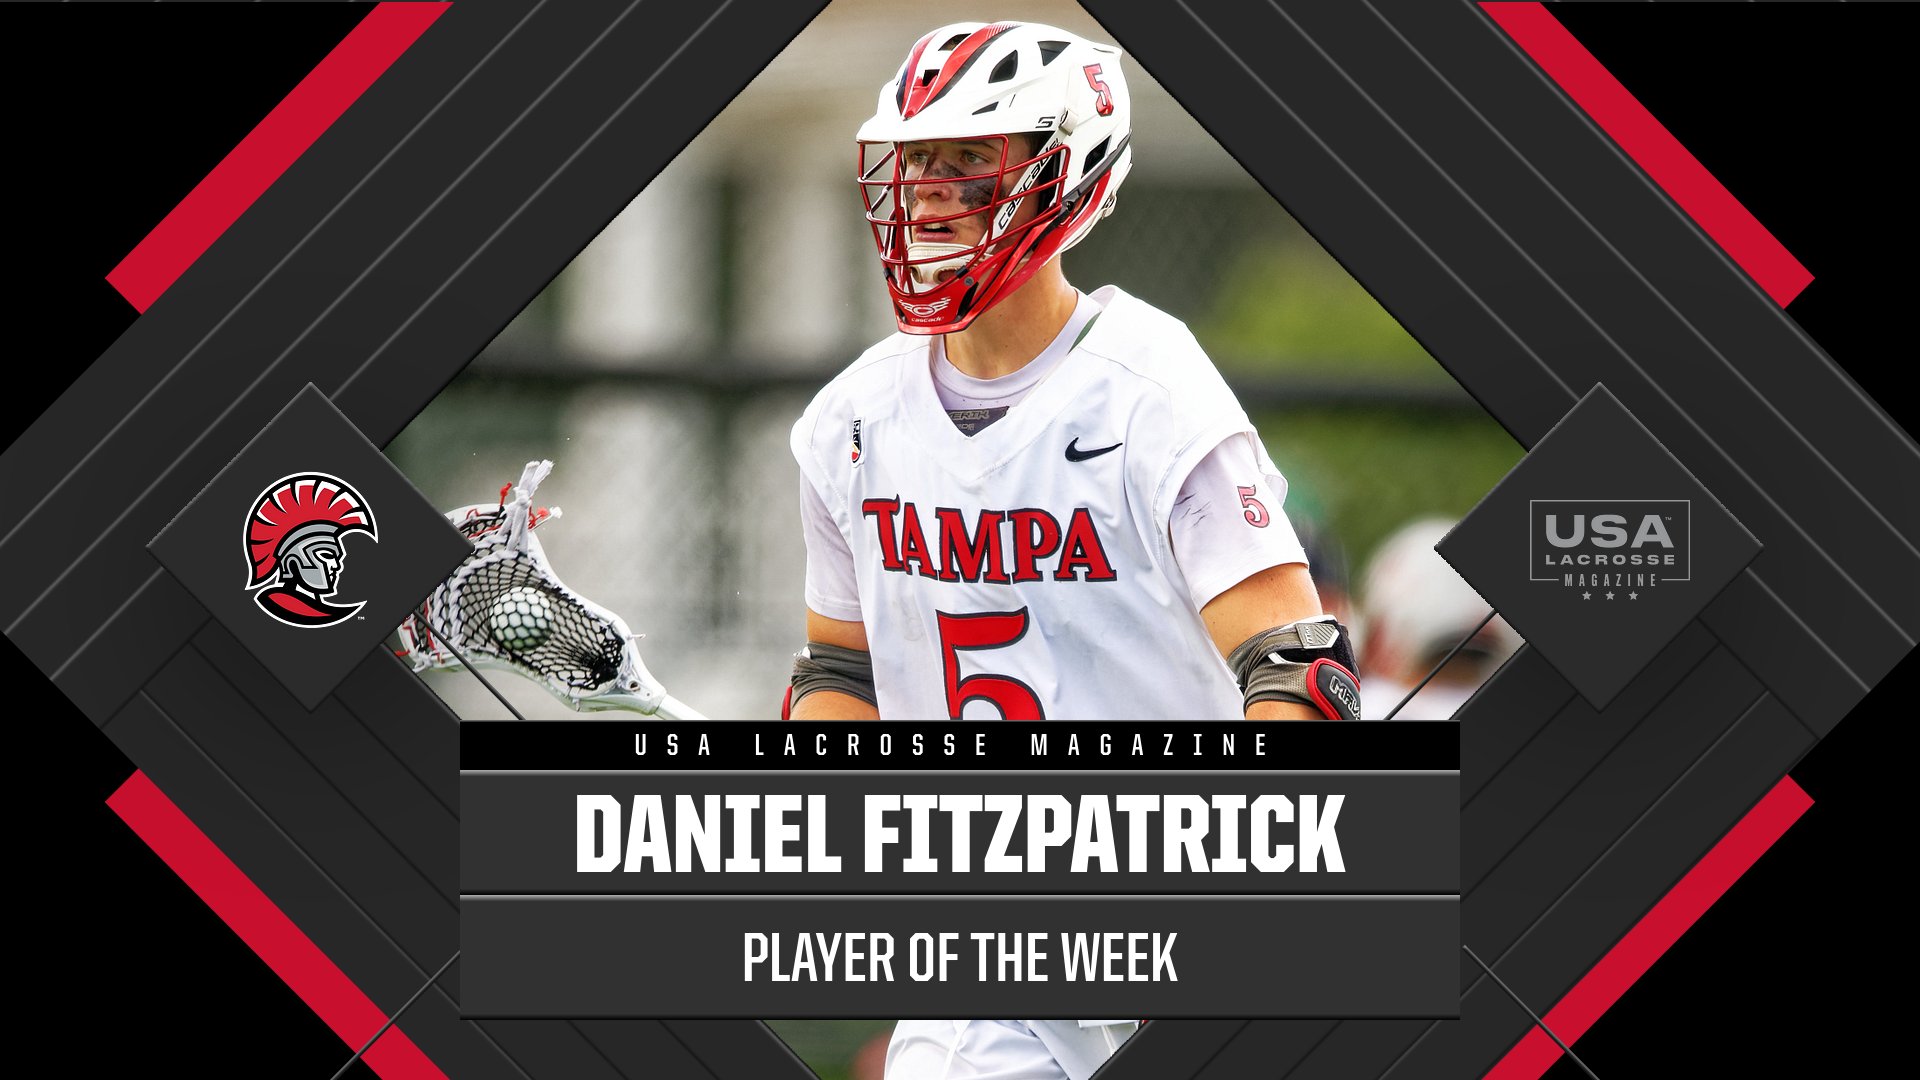 Daniel Fitzpatrick Named USA Lacrosse Magazine Player of the Week